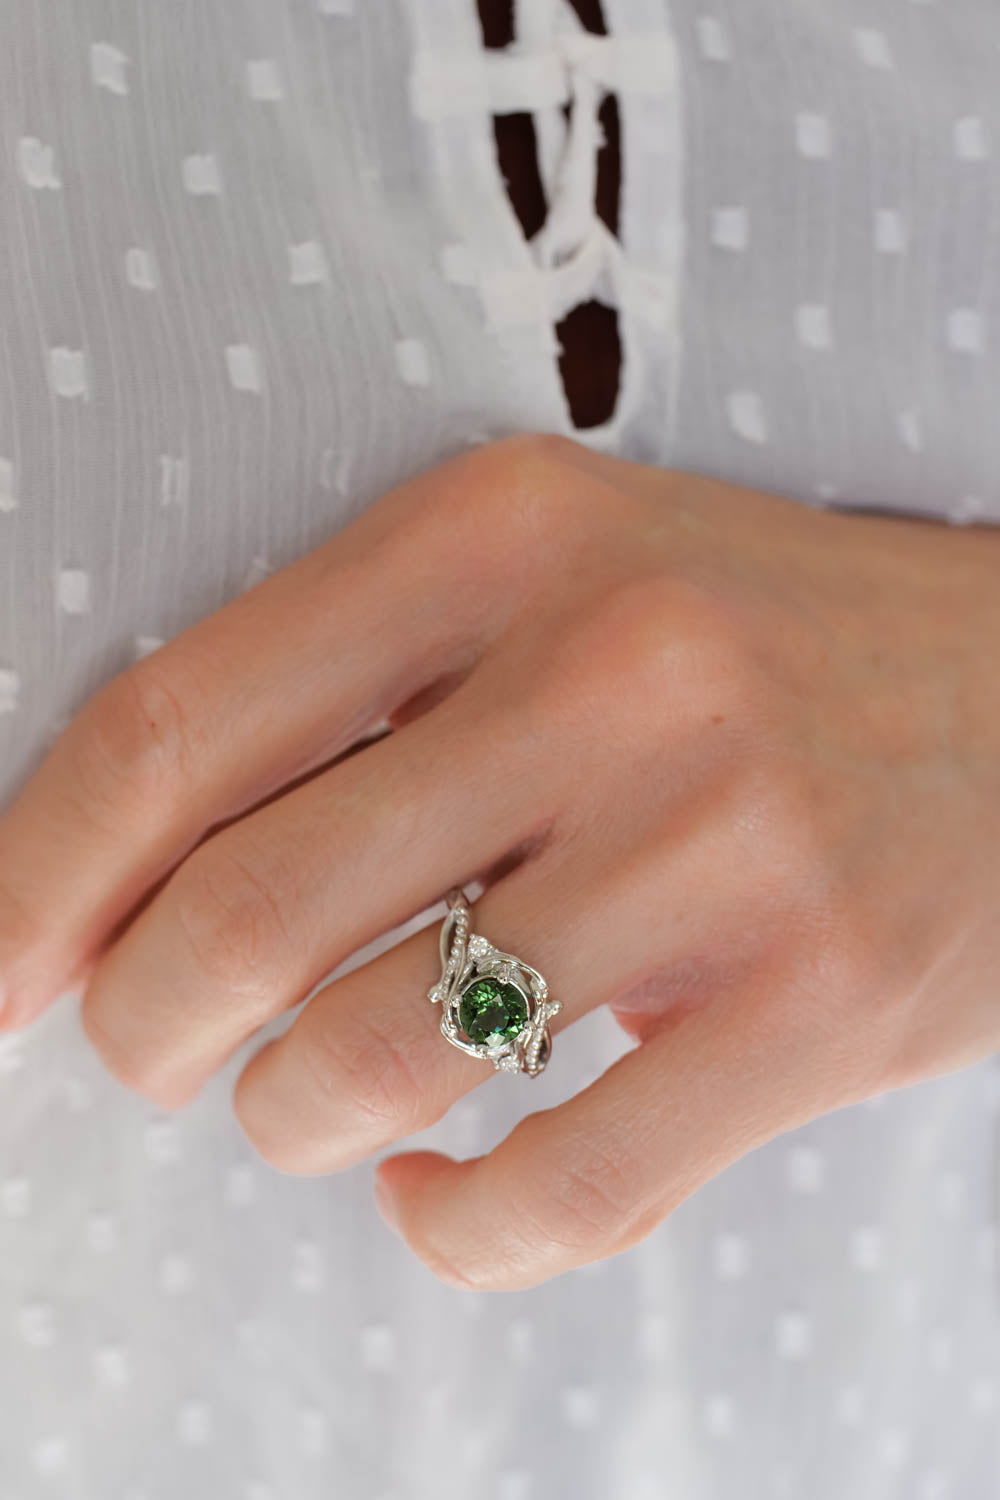 central gemstone of this ring is green tourmaline , round cut, ring in white gold 14K